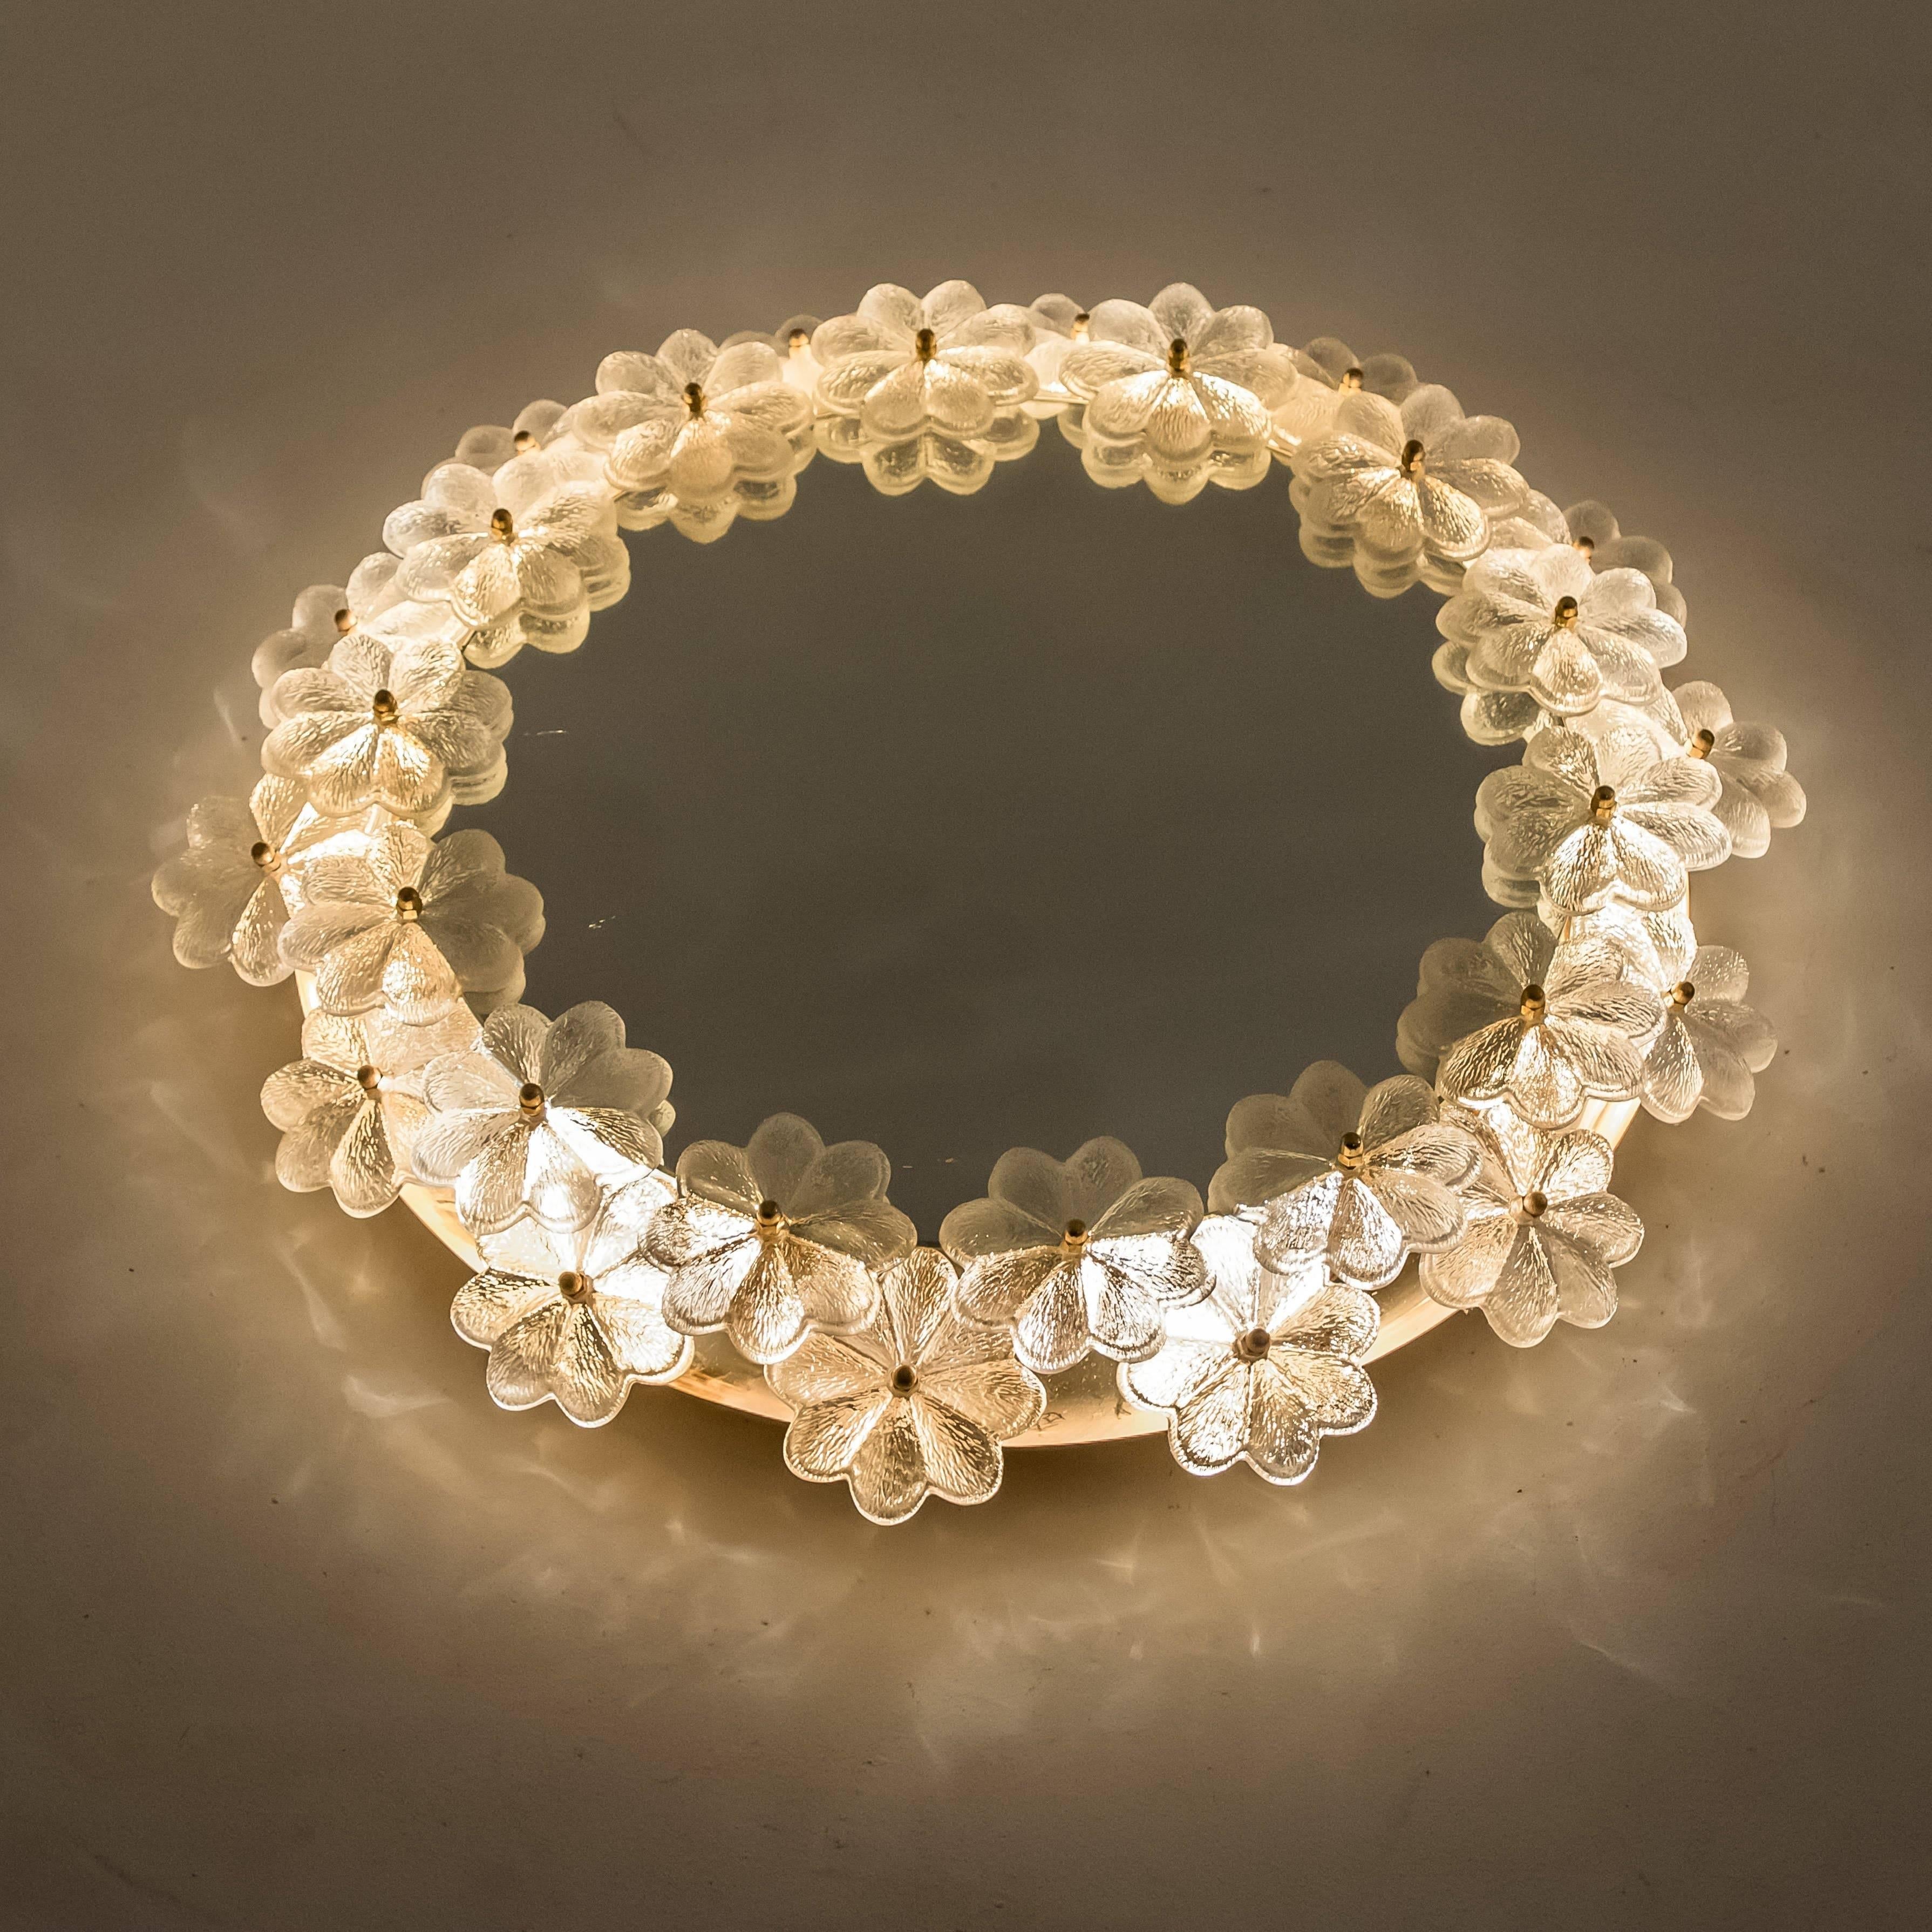 Illuminated or backlit mirror by Ernst Palme, Germany, 1970s.

The mirror sits in the center of a brass frame surrounded by 28 glass flowers of approximately nine cm diameter, each screwed into the frame with a decorative pin making the center of